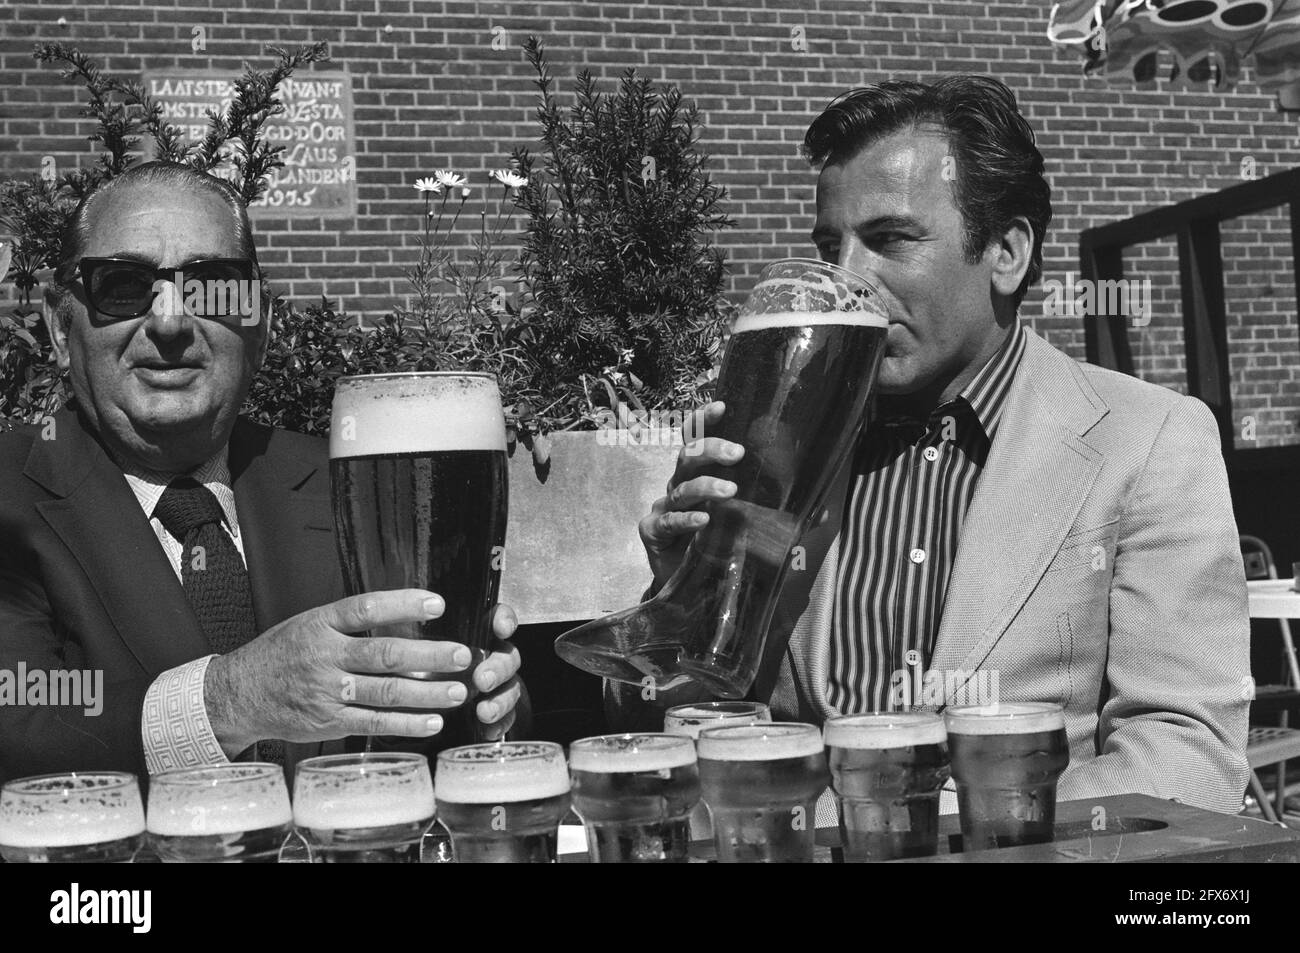 Actor Maximilian Schell in  a Bridge too Far, gives press conference in Amsterdam, left producer Levine, right Schell with boot of beer, June 13, 1976, actors, film producers, films, film stars, press conferences, The Netherlands, 20th century press agency photo, news to remember, documentary, historic photography 1945-1990, visual stories, human history of the Twentieth Century, capturing moments in time Stock Photo